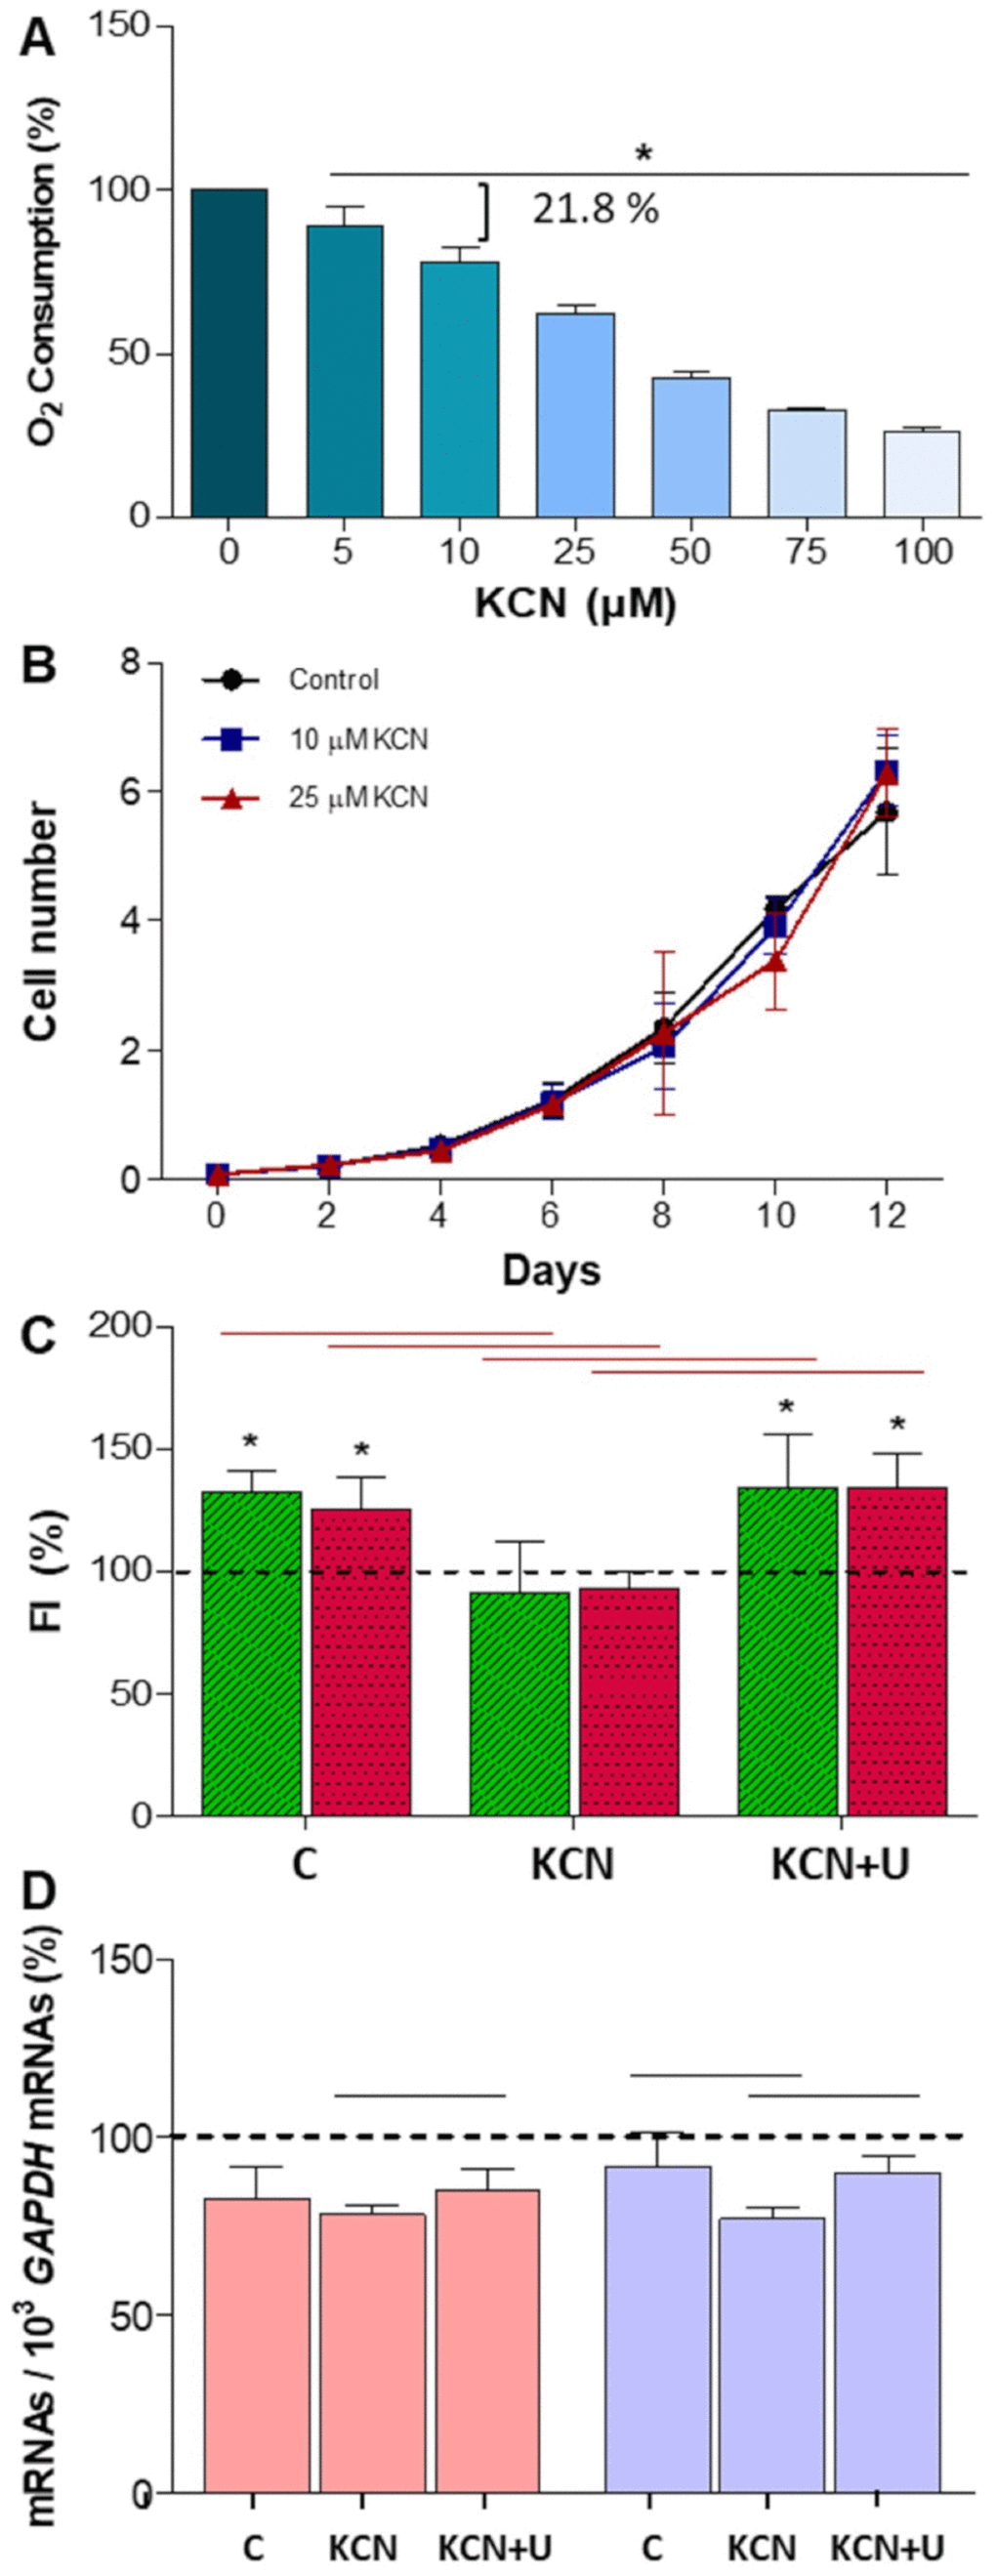 Potassium cyanide (KCN) effect on neuroblastoma SH-SY5Y cells. N ≥ 3. (A) Oxygen consumption in proliferating SH-SY5Y cells at increasing KCN concentrations. *: p B) Cell proliferation (in million cells) without KCN (control) and at 10 or 25 μM KCN. (C) TUBB3 (green) and TH (red) fluorescence intensity (FI) mean and standard deviation values in neuron-differentiated cells. Dashed line (100 %) represents TUBB3 or TH mean values of undifferentiated cells. *: p C), KCN-treated neuron-differentiated cells (KCN) and KCN plus uridine-treated neuron-differentiated cells (KCN+U), as indicated. (D) DHODH (pink) and UCK2 (purple) mRNA mean and standard deviation values in C, KCN and KCN+U neuron-differentiated cells. Dashed line (100 %) represents DHODH and UCK2 mRNA mean values of undifferentiated cells. Black horizontal lines indicate p values 